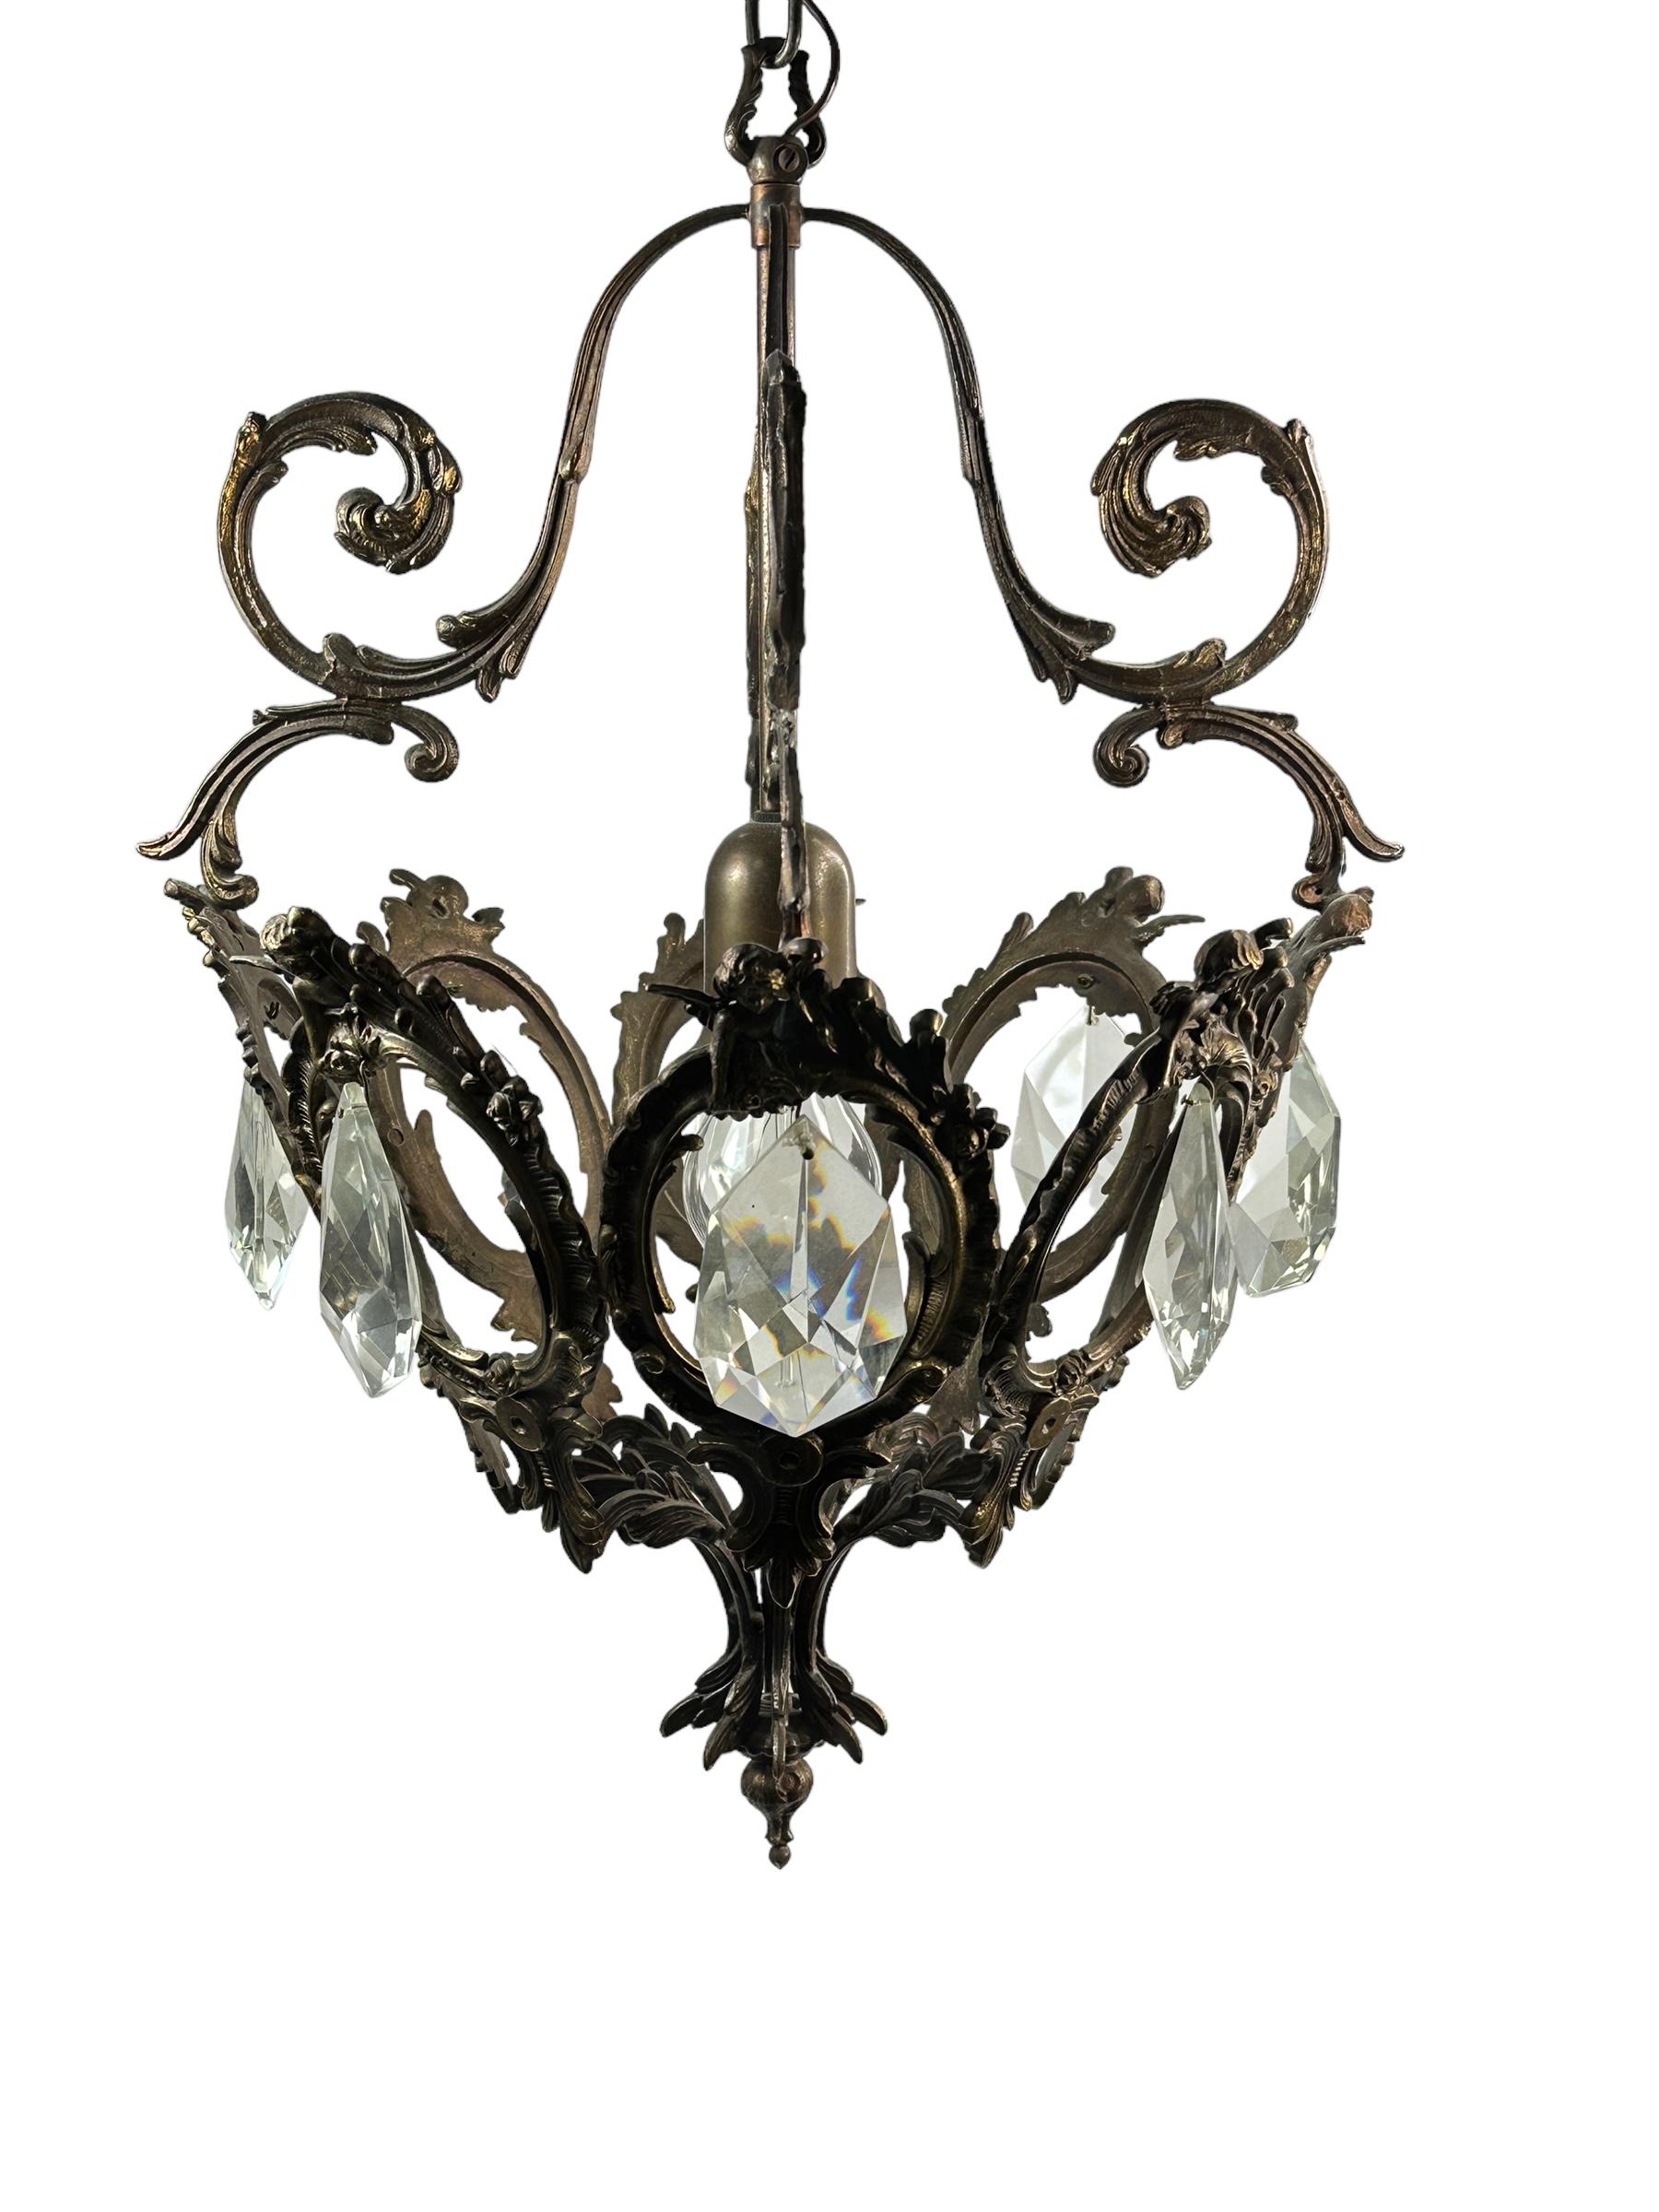 Hollywood Regency Maison Baguès Style Iron and Crystal Lantern Chandelier, Italy, 1950's For Sale